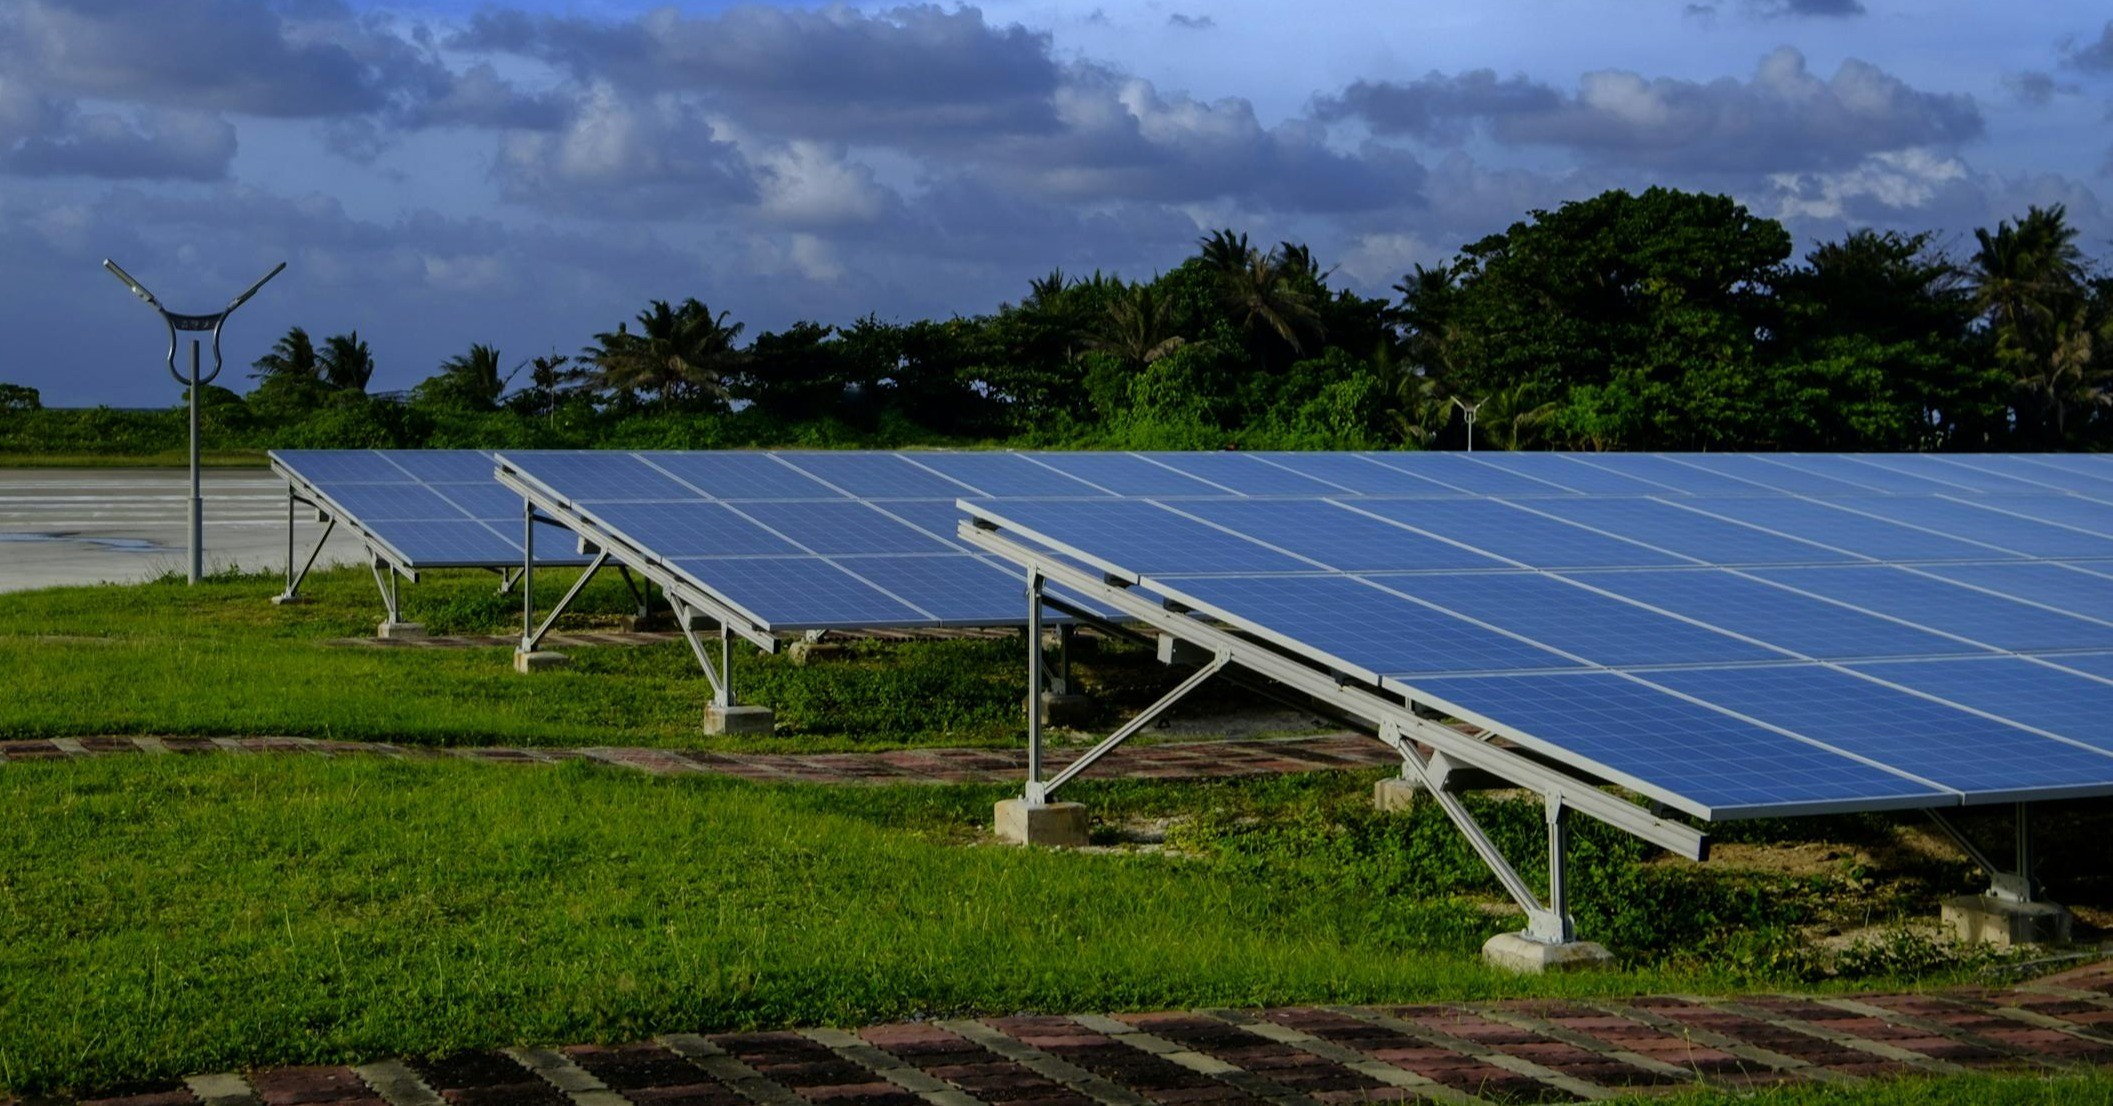 TAIPING ISLAND (ITU ABA), SPRATLY ISLANDS, TAIWAN - 2017/02/10: Solar panels in Taiping Island, Itu Aba, which generate 18% of the energy requires in the islands. 
The Island is under ROC, Taiwan, control and is restricted to visitors.
The island is under ROC control since 1946 and is disputed among several Asian nations such as Vietnam, PRC and The Philippines. (Photo by Alberto Buzzola/LightRocket via Getty Images)